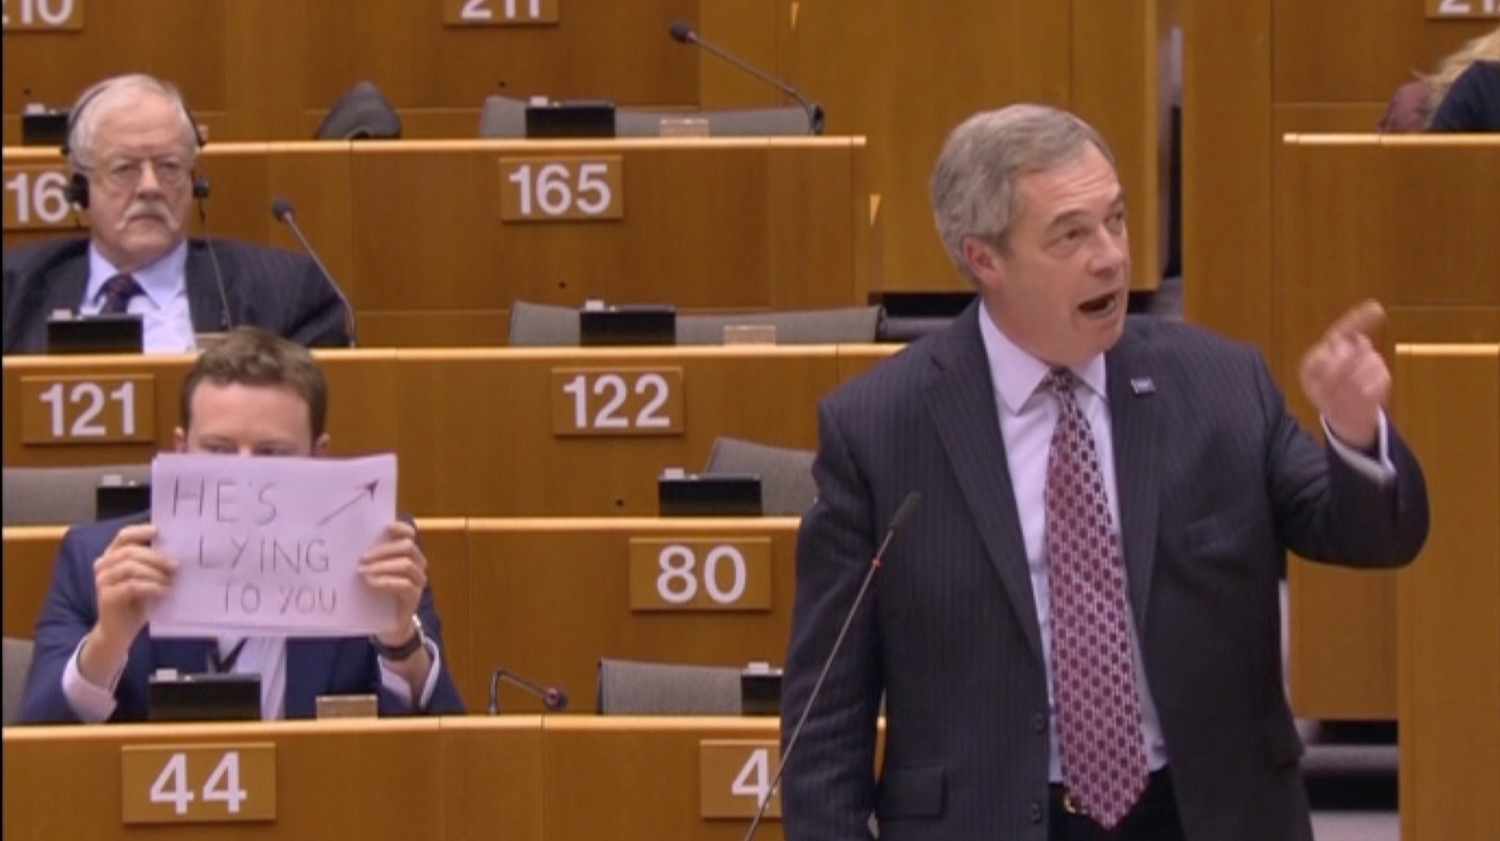 BRUSSELS 2017-02-01 Labour Member of the European Parliament Seb Dance holds a sign that reads "He's lying to you" behind former UKIP leader and MEP Nigel Farage, who is addressing the European Parliament in Brussels, Belgium, in this still image taken from video February 1, 2017. Courtesy of the European Union 2017 European Parliament/EBS/Handout via REUTERS TV ATTENTION EDITORS - THIS IMAGE WAS PROVIDED BY A THIRD PARTY. EDITORIAL USE ONLY. NO RESALES. NO ARCHIVES. TPX IMAGES OF THE DAY Photo: / REUTERS / TT / kod 72000